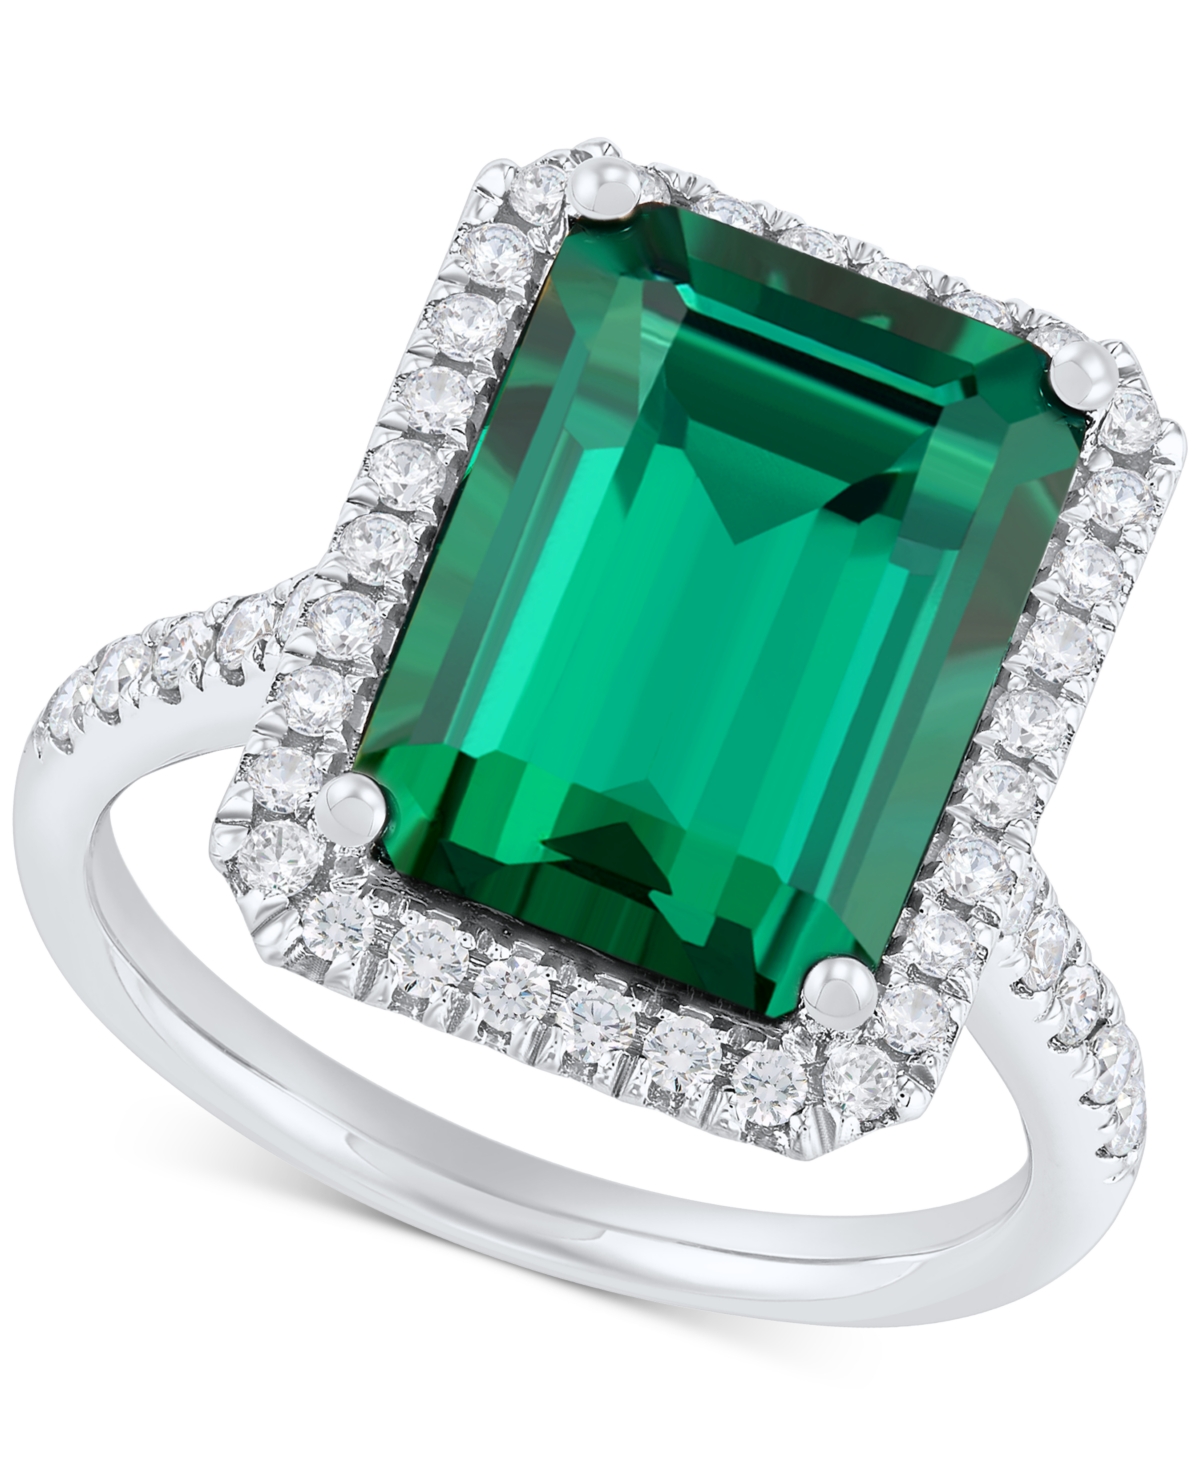 Lab Grown Emerald (6-1/2 ct. t.w.) & Lab Grown Diamond (1/2 ct. t.w.) Ring in 14k White Gold - Emerald